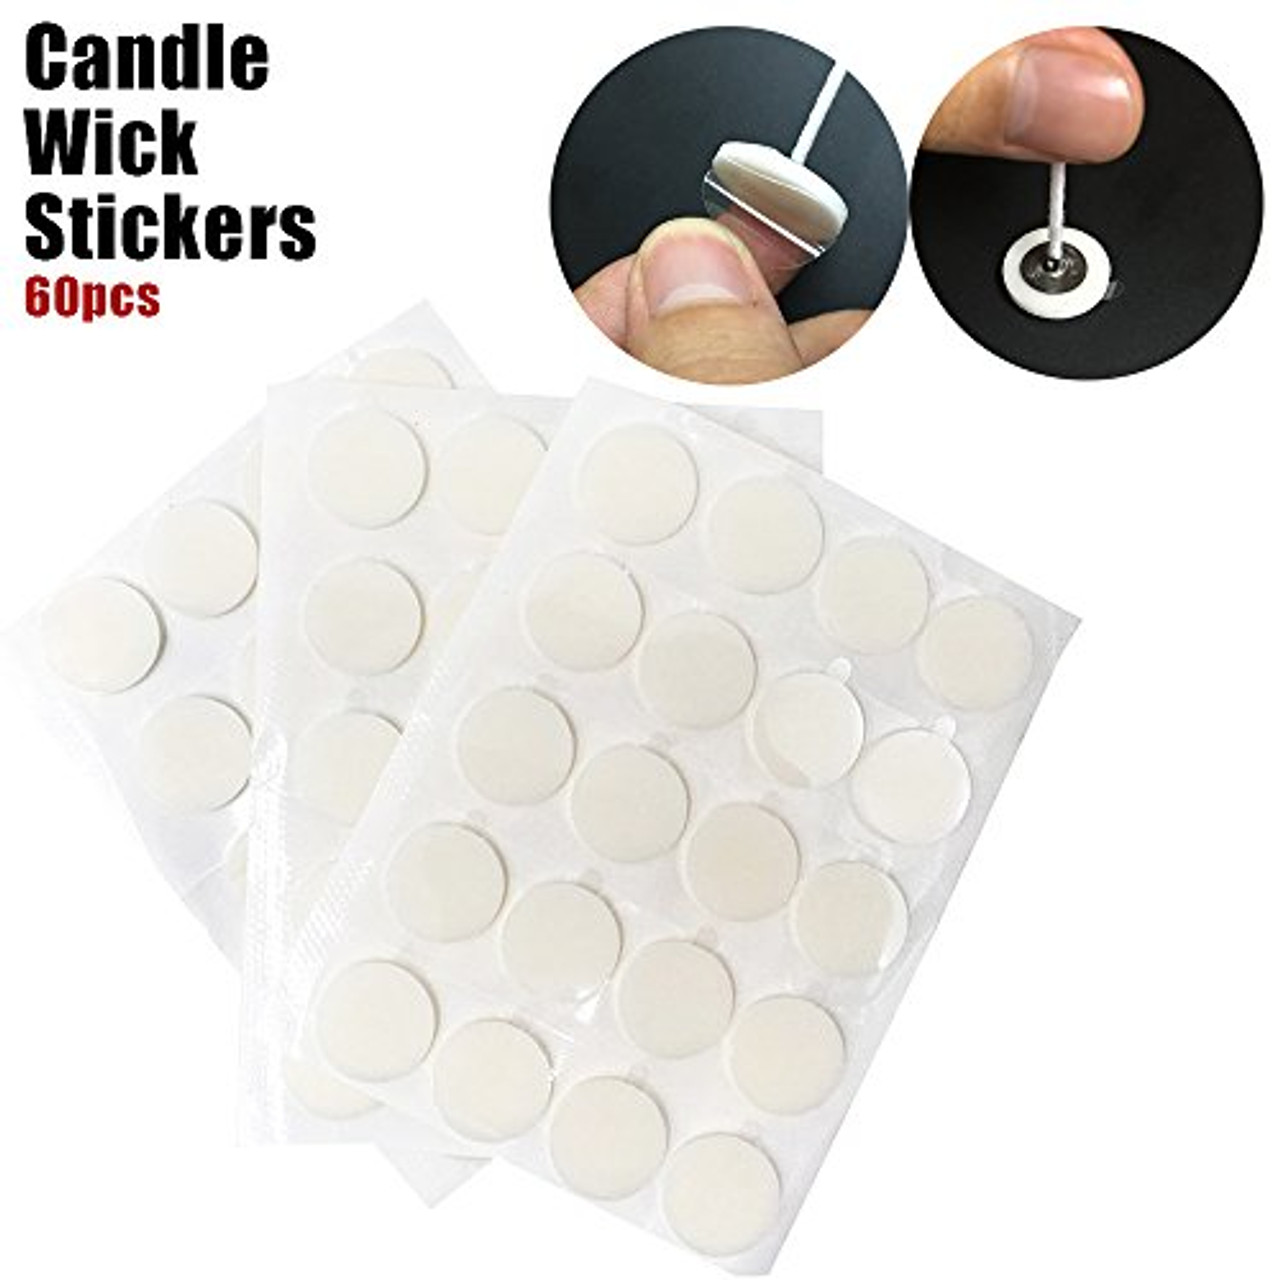 EricX Light 8 inch Candle Wick with Candle Wick Stickers and Candle Wick  Centering Device,60